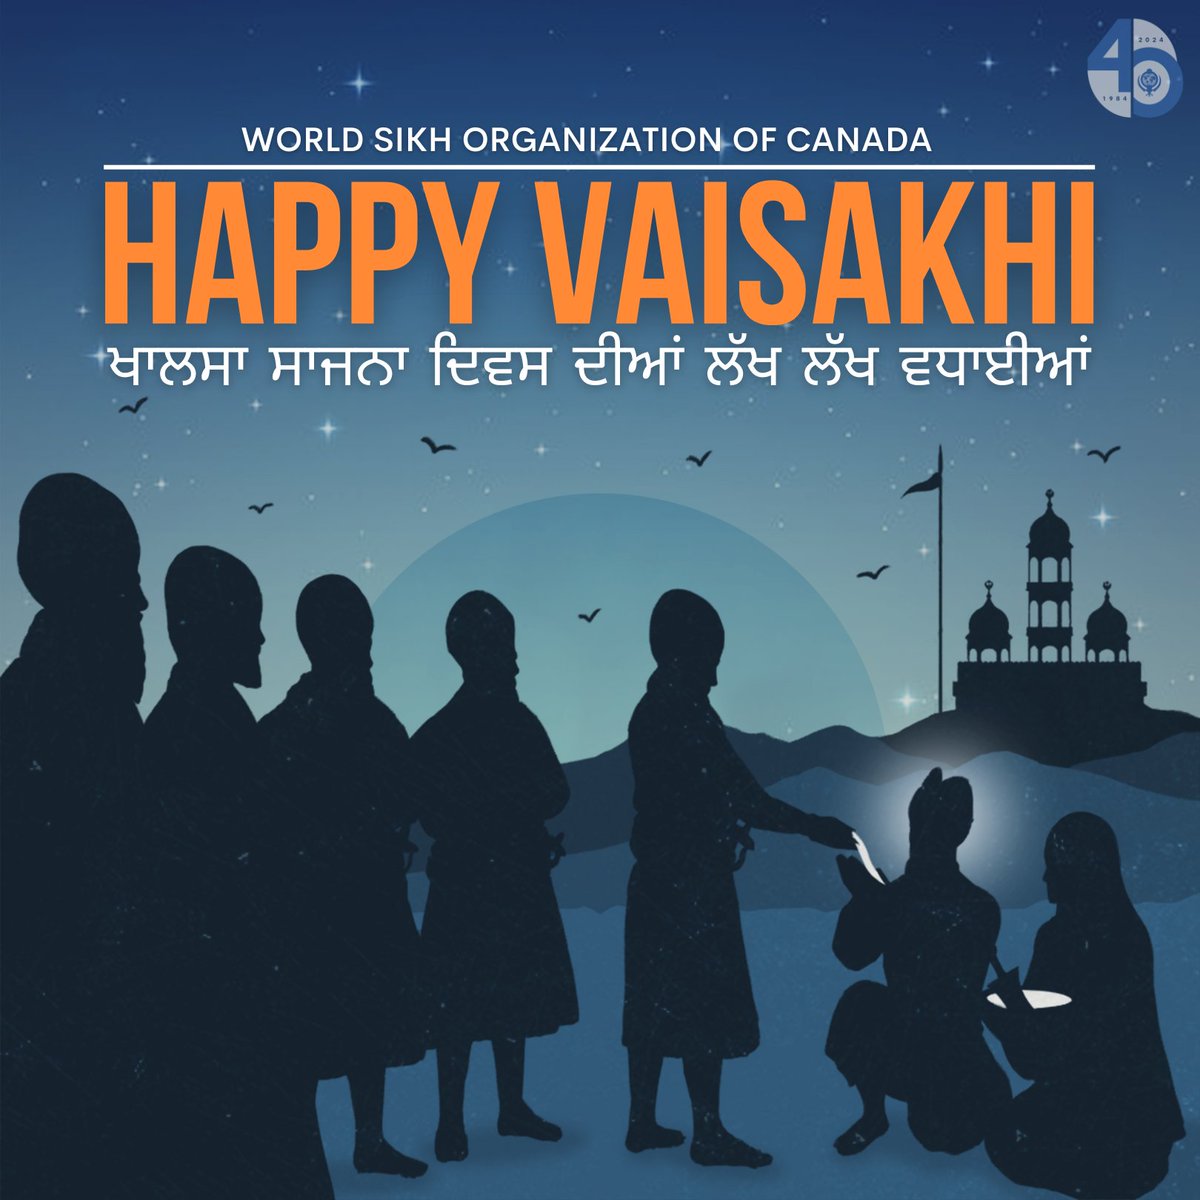 The WSO wishes everyone a Happy Vaisakhi! April 13th marks the momentous occasion where our tenth Guru, Sri Guru Gobind Singh Ji bestowed the gift of the Khalsa upon the Sikh community, introducing Amrit and the Panj Kakaars. Vaisakhi is a celebration of the identity and values…